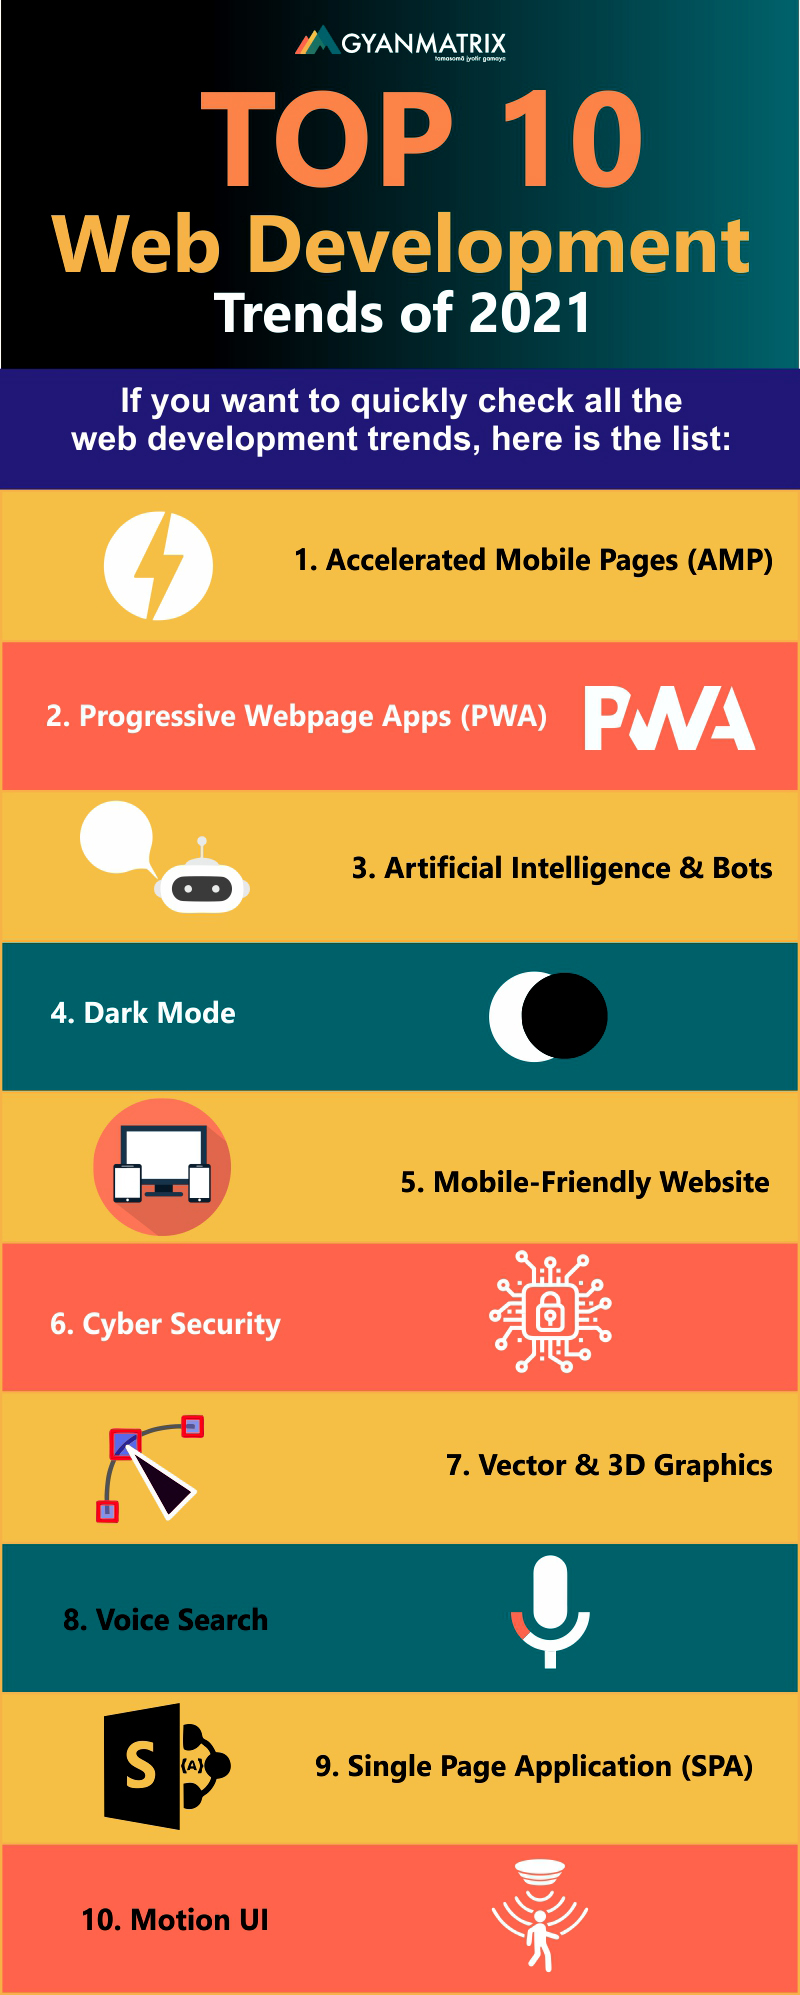 Infographic contains a list of top 10 web development trends for 2021